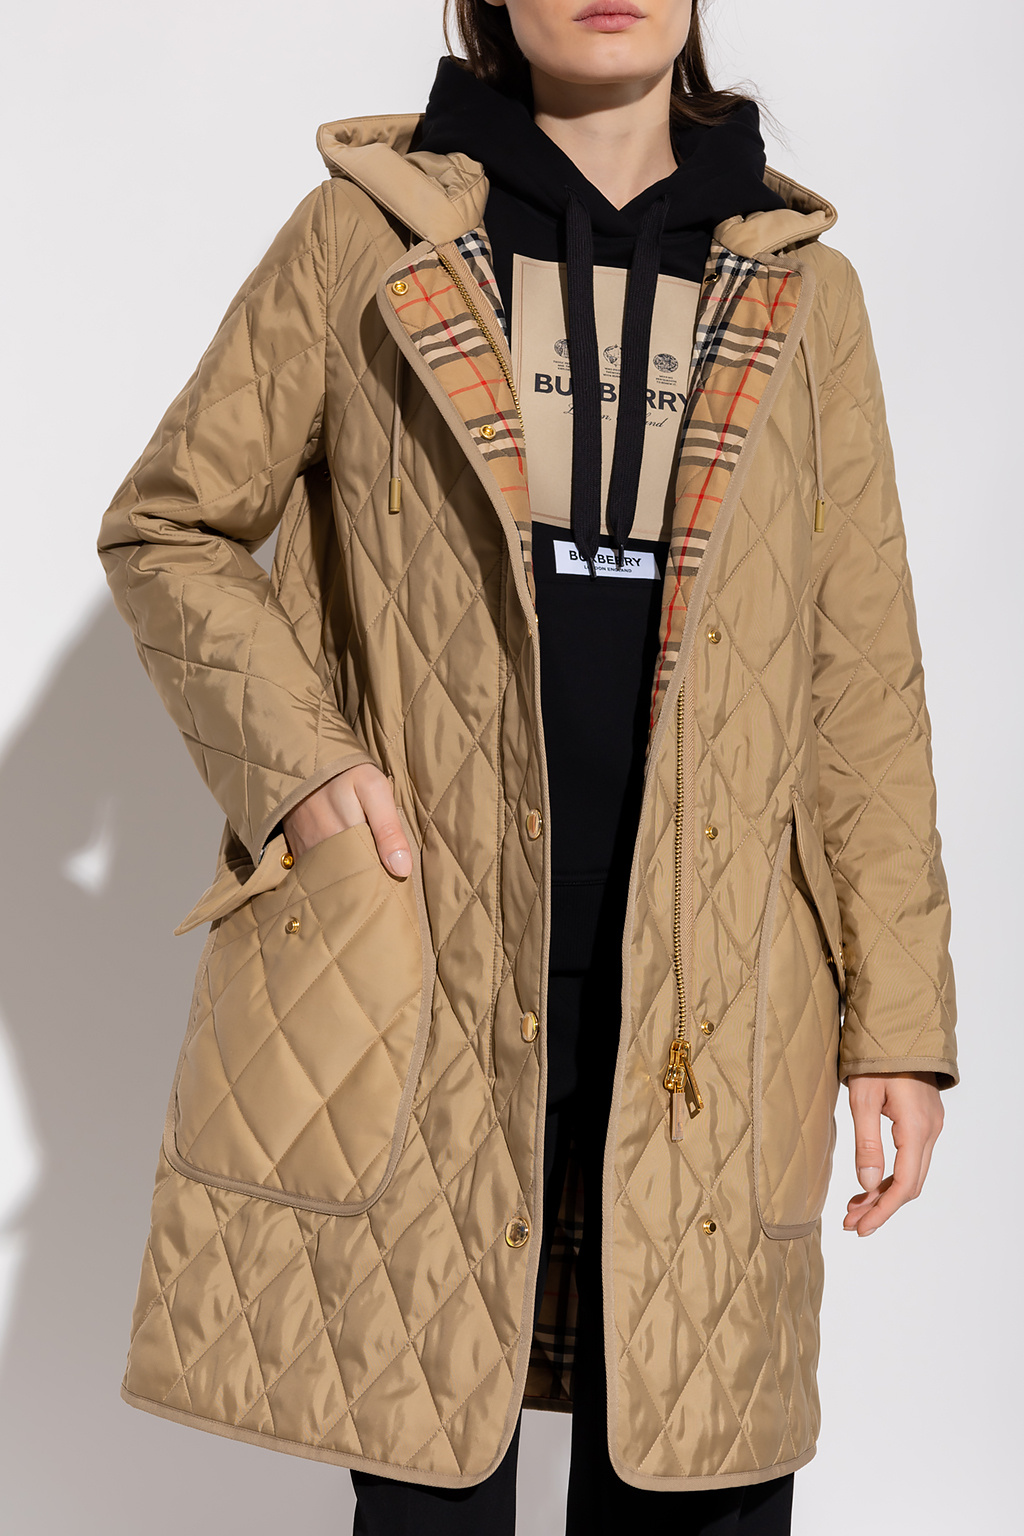 Burberry ‘Roxby’ quilted coat with hood